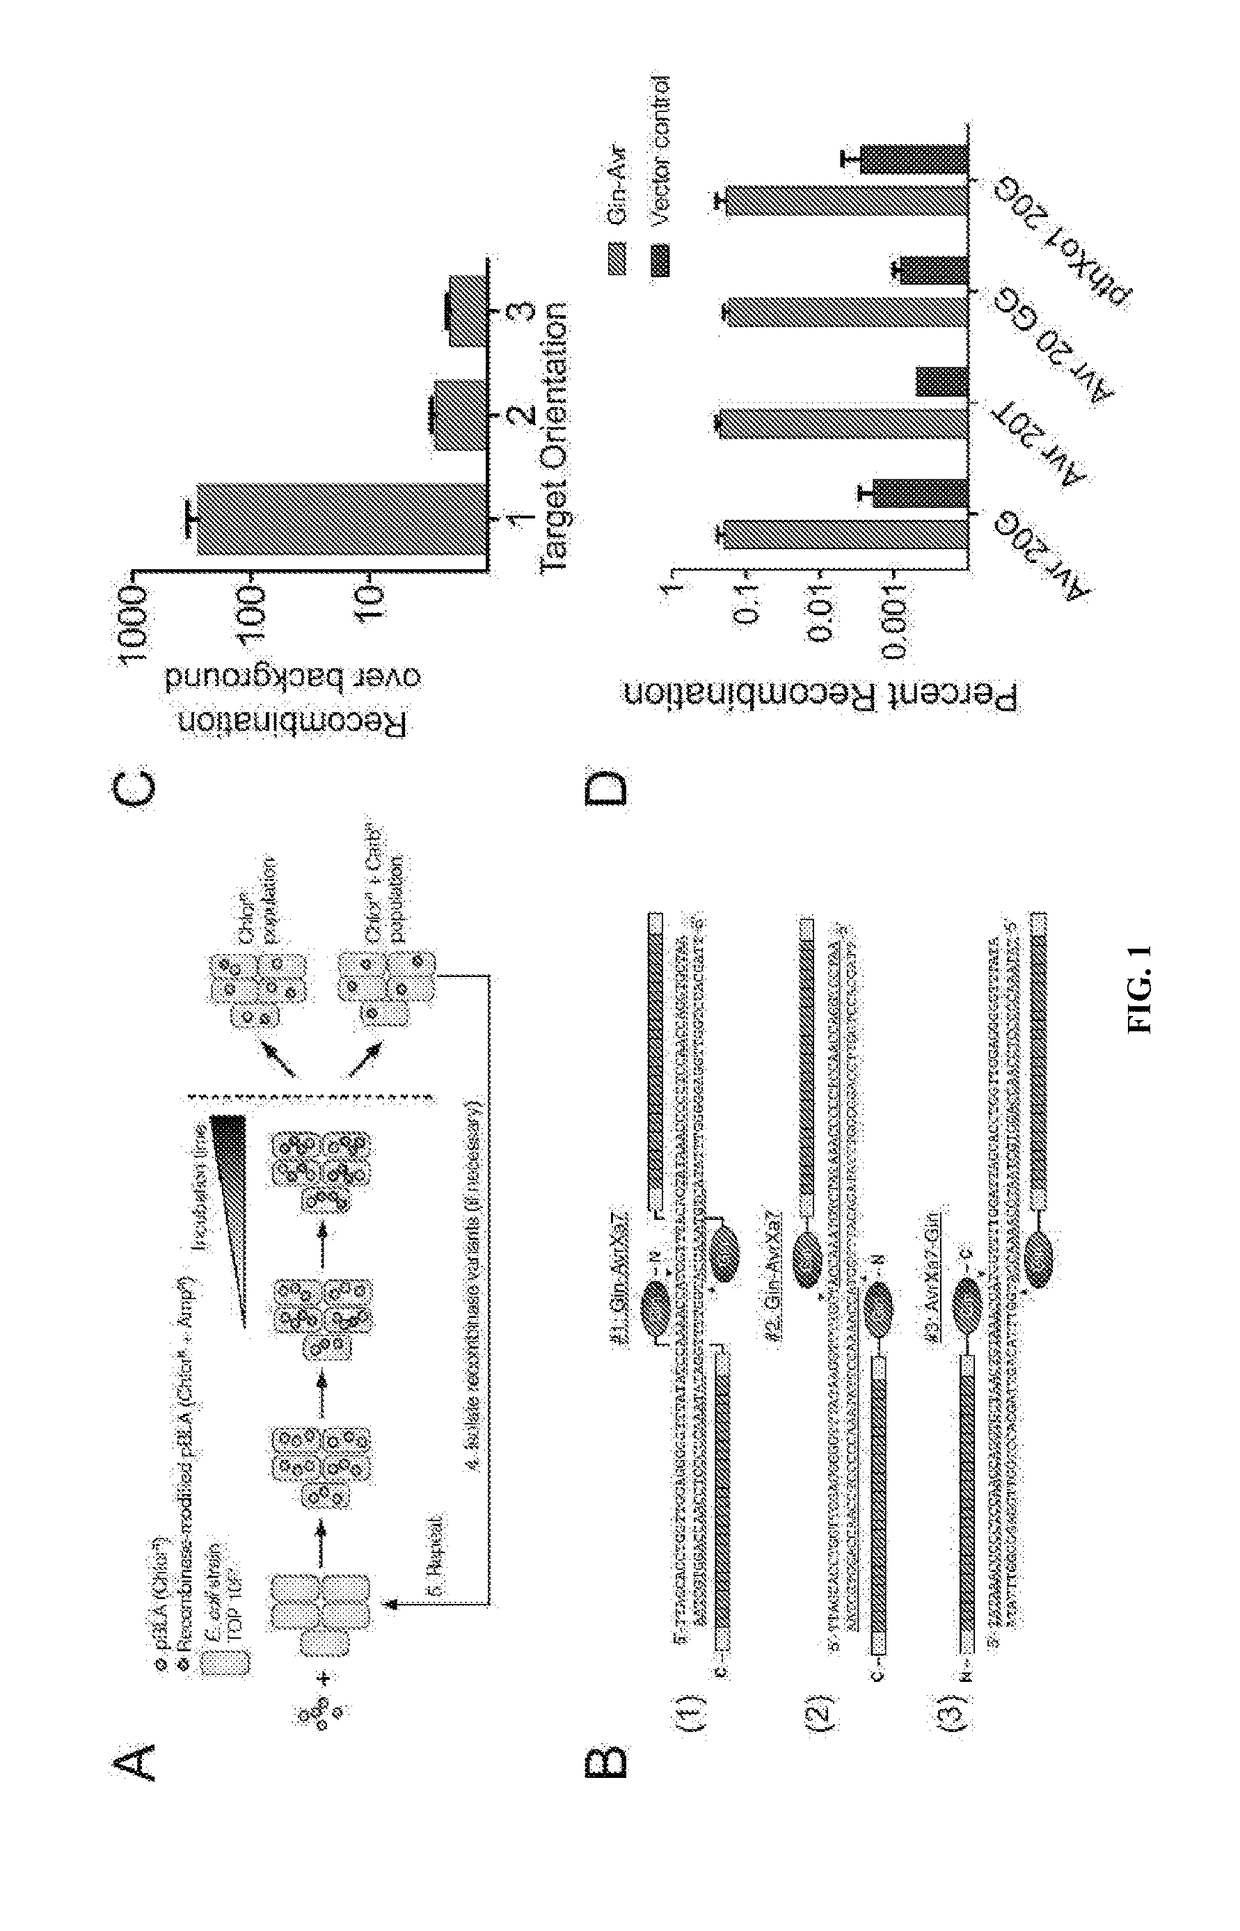 Chimeric polypeptides having targeted binding specificity